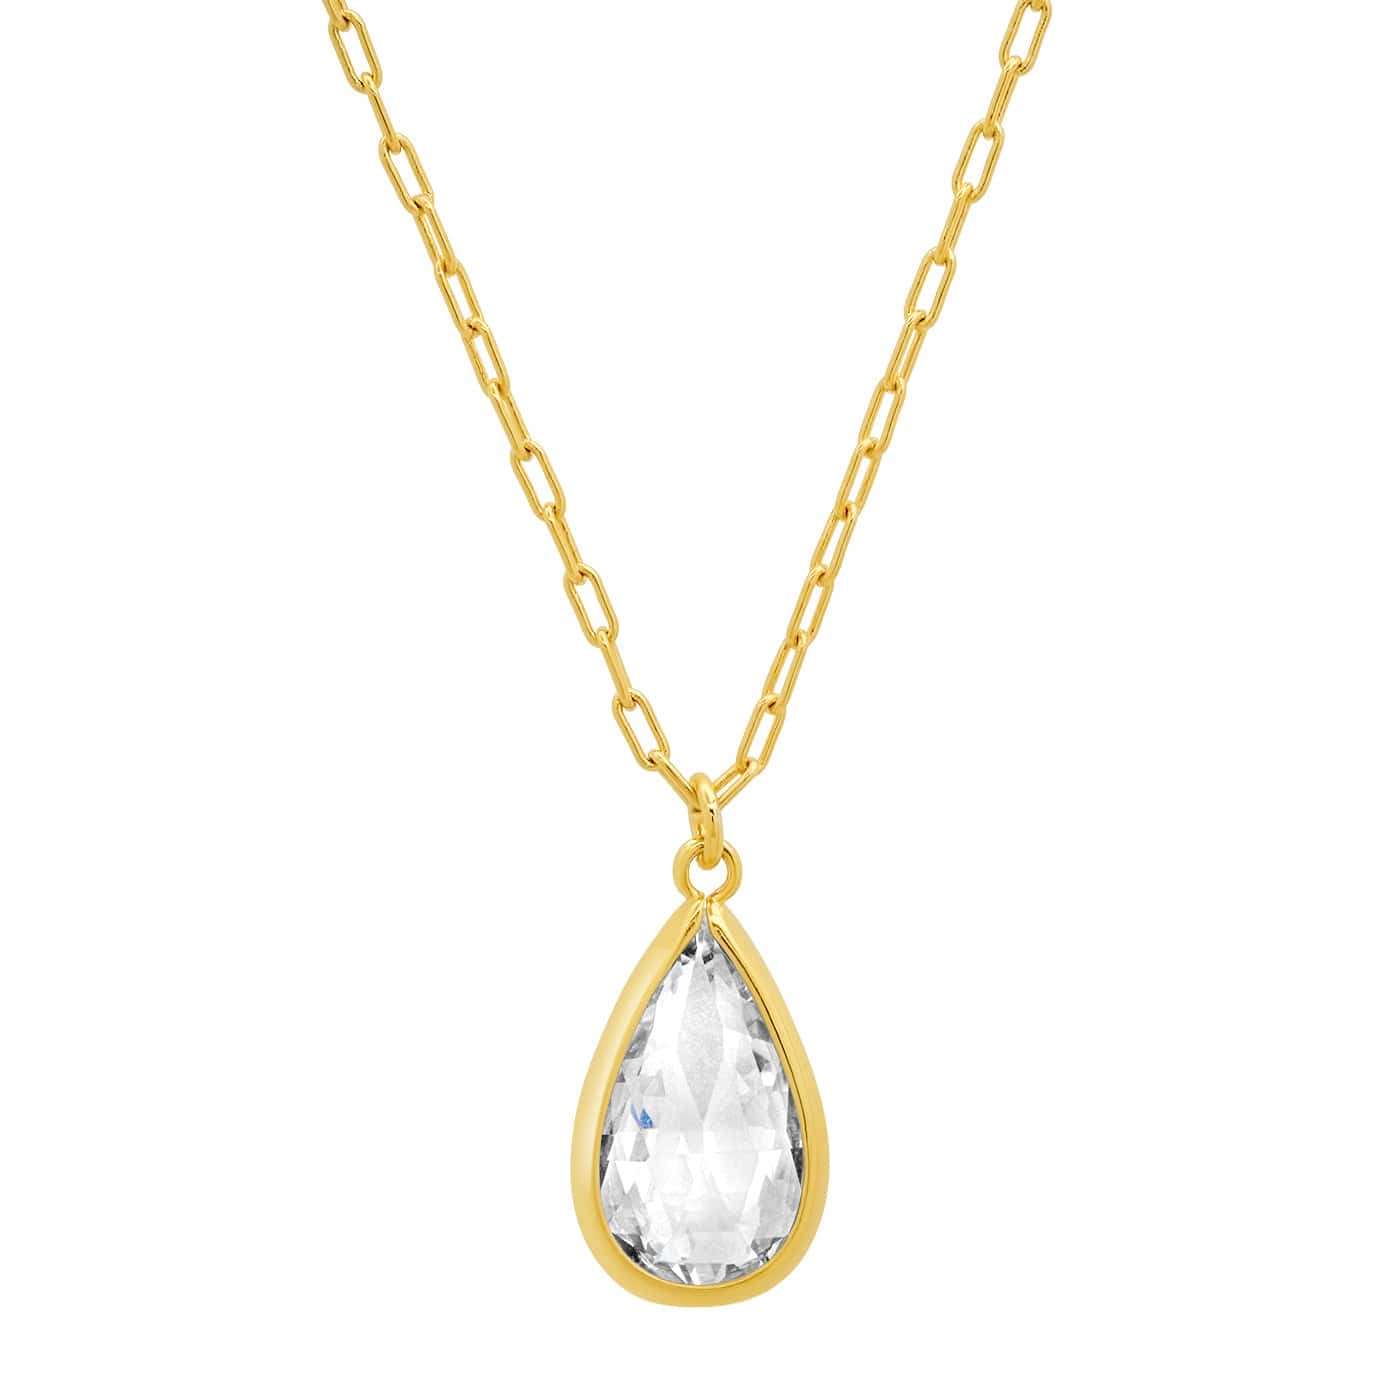 TAI JEWELRY Necklace Pear Shaped CZ Necklace